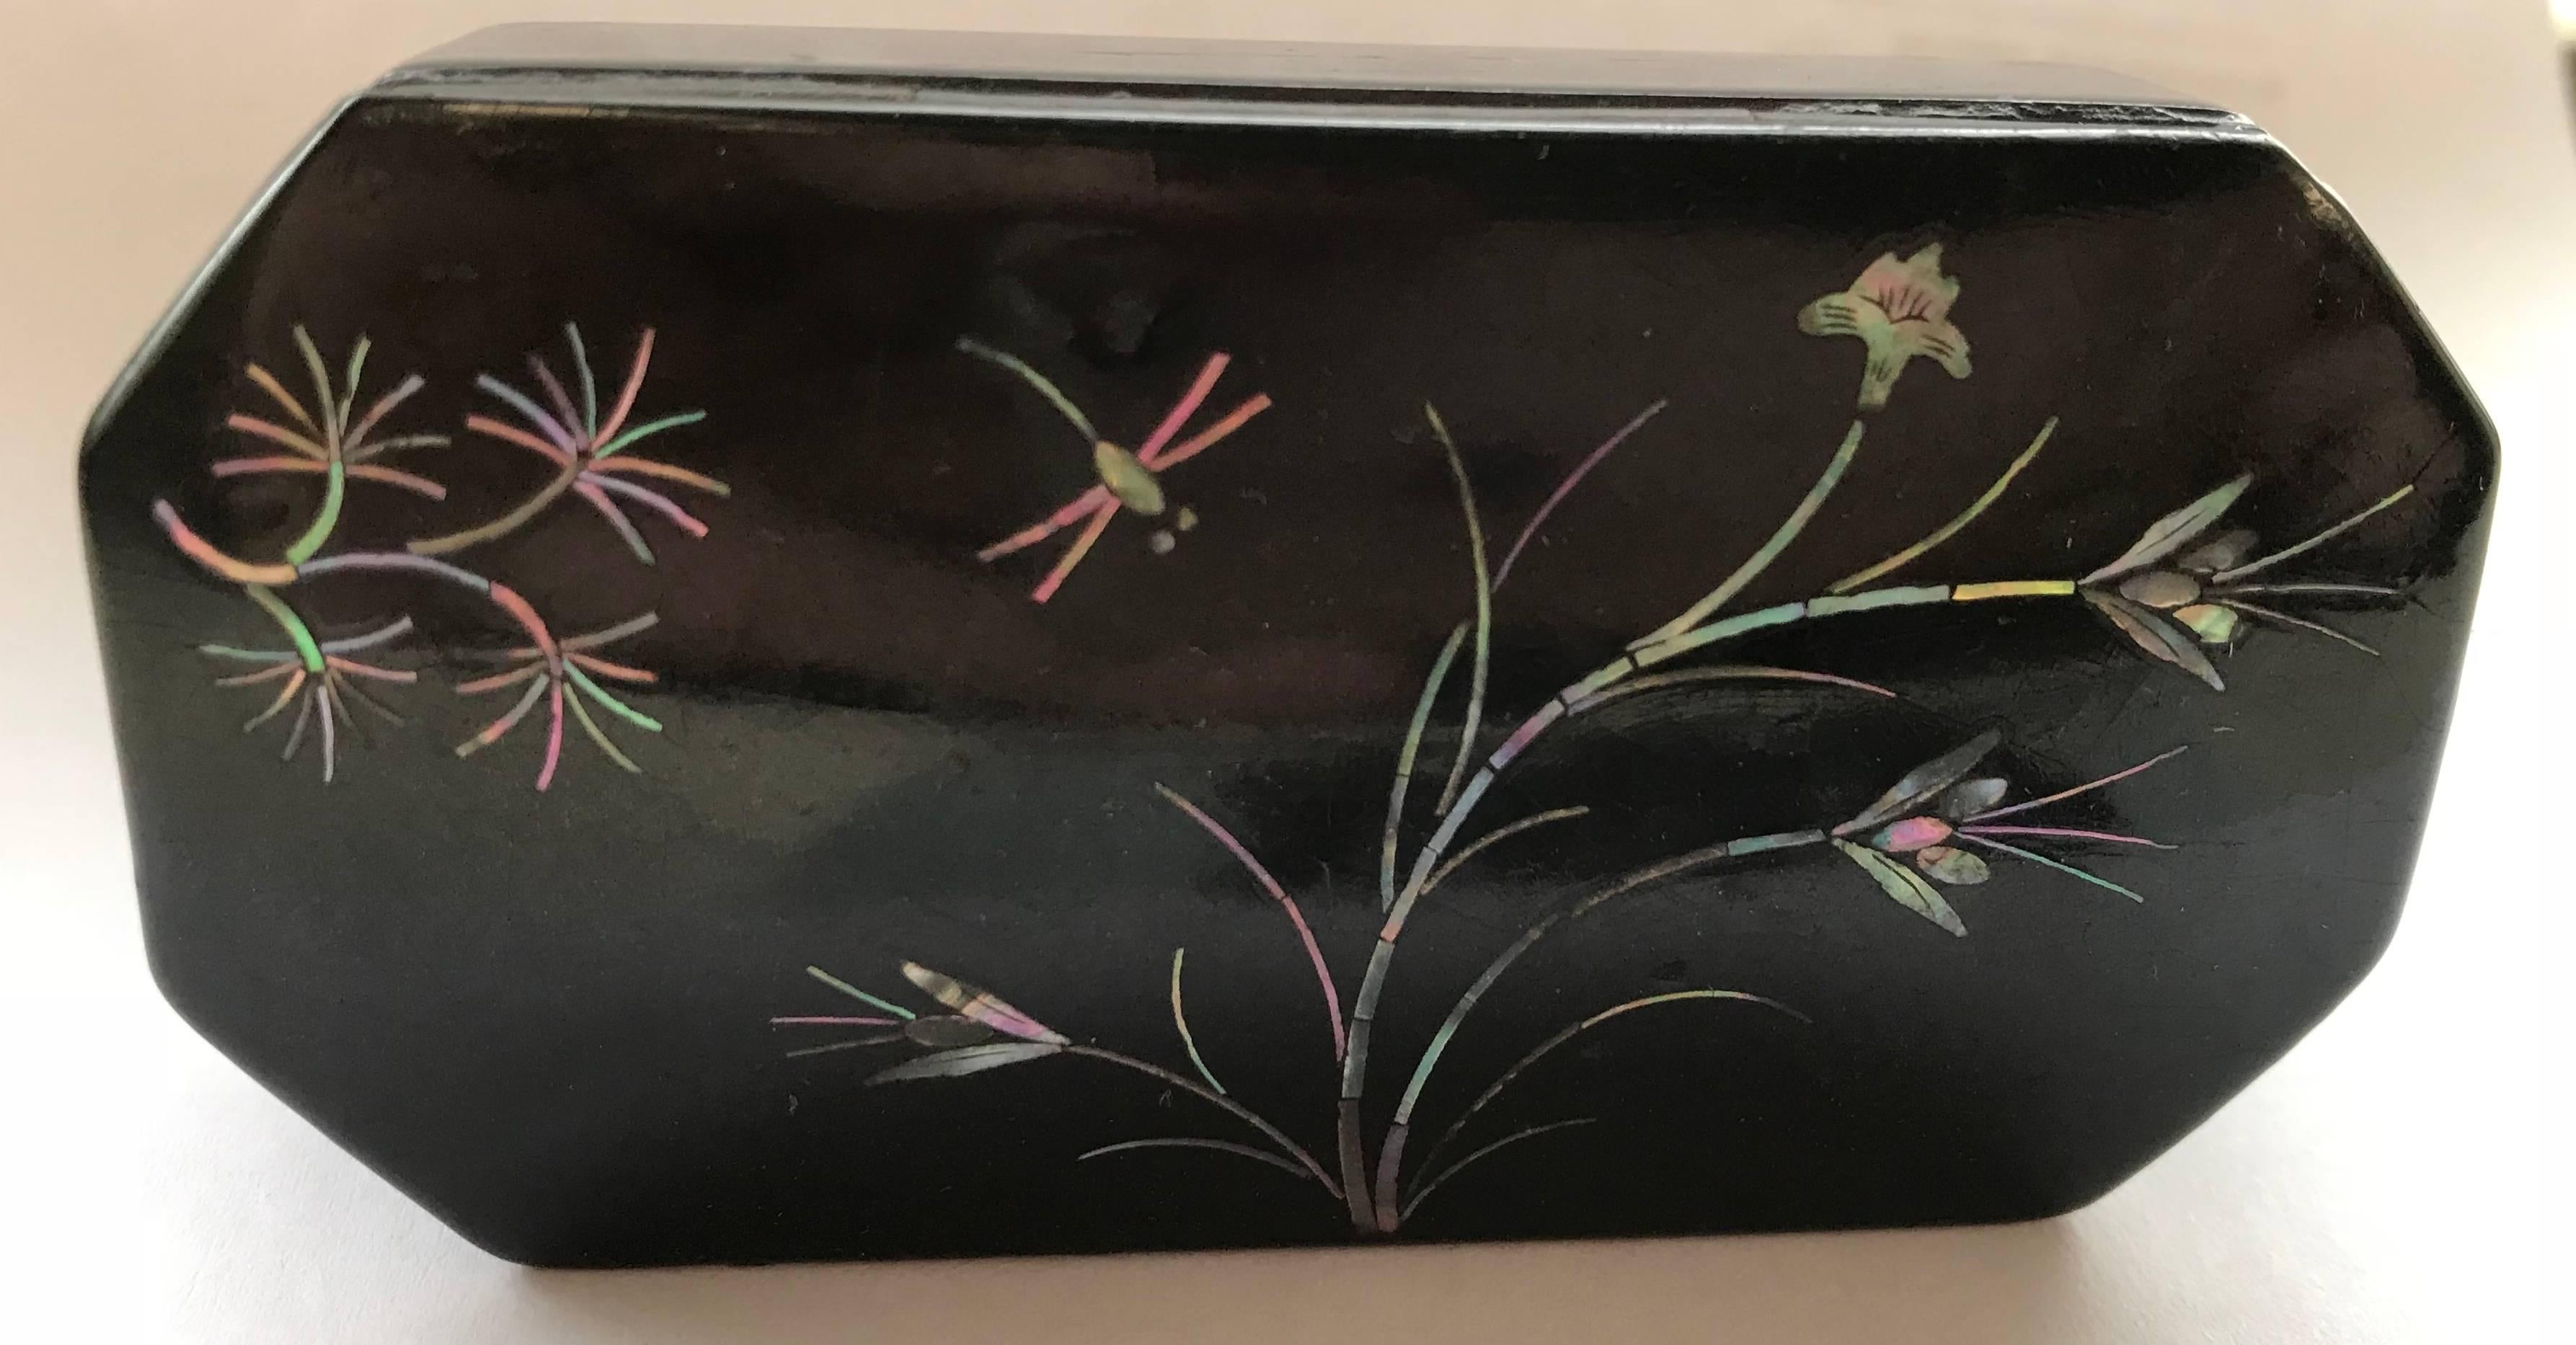 A dragonfly is flying amongst the inlaid mother of pearl flowers on this Asian black lacquer snuff box. It has angled lines to add to its character. The inside is lined in zinc.